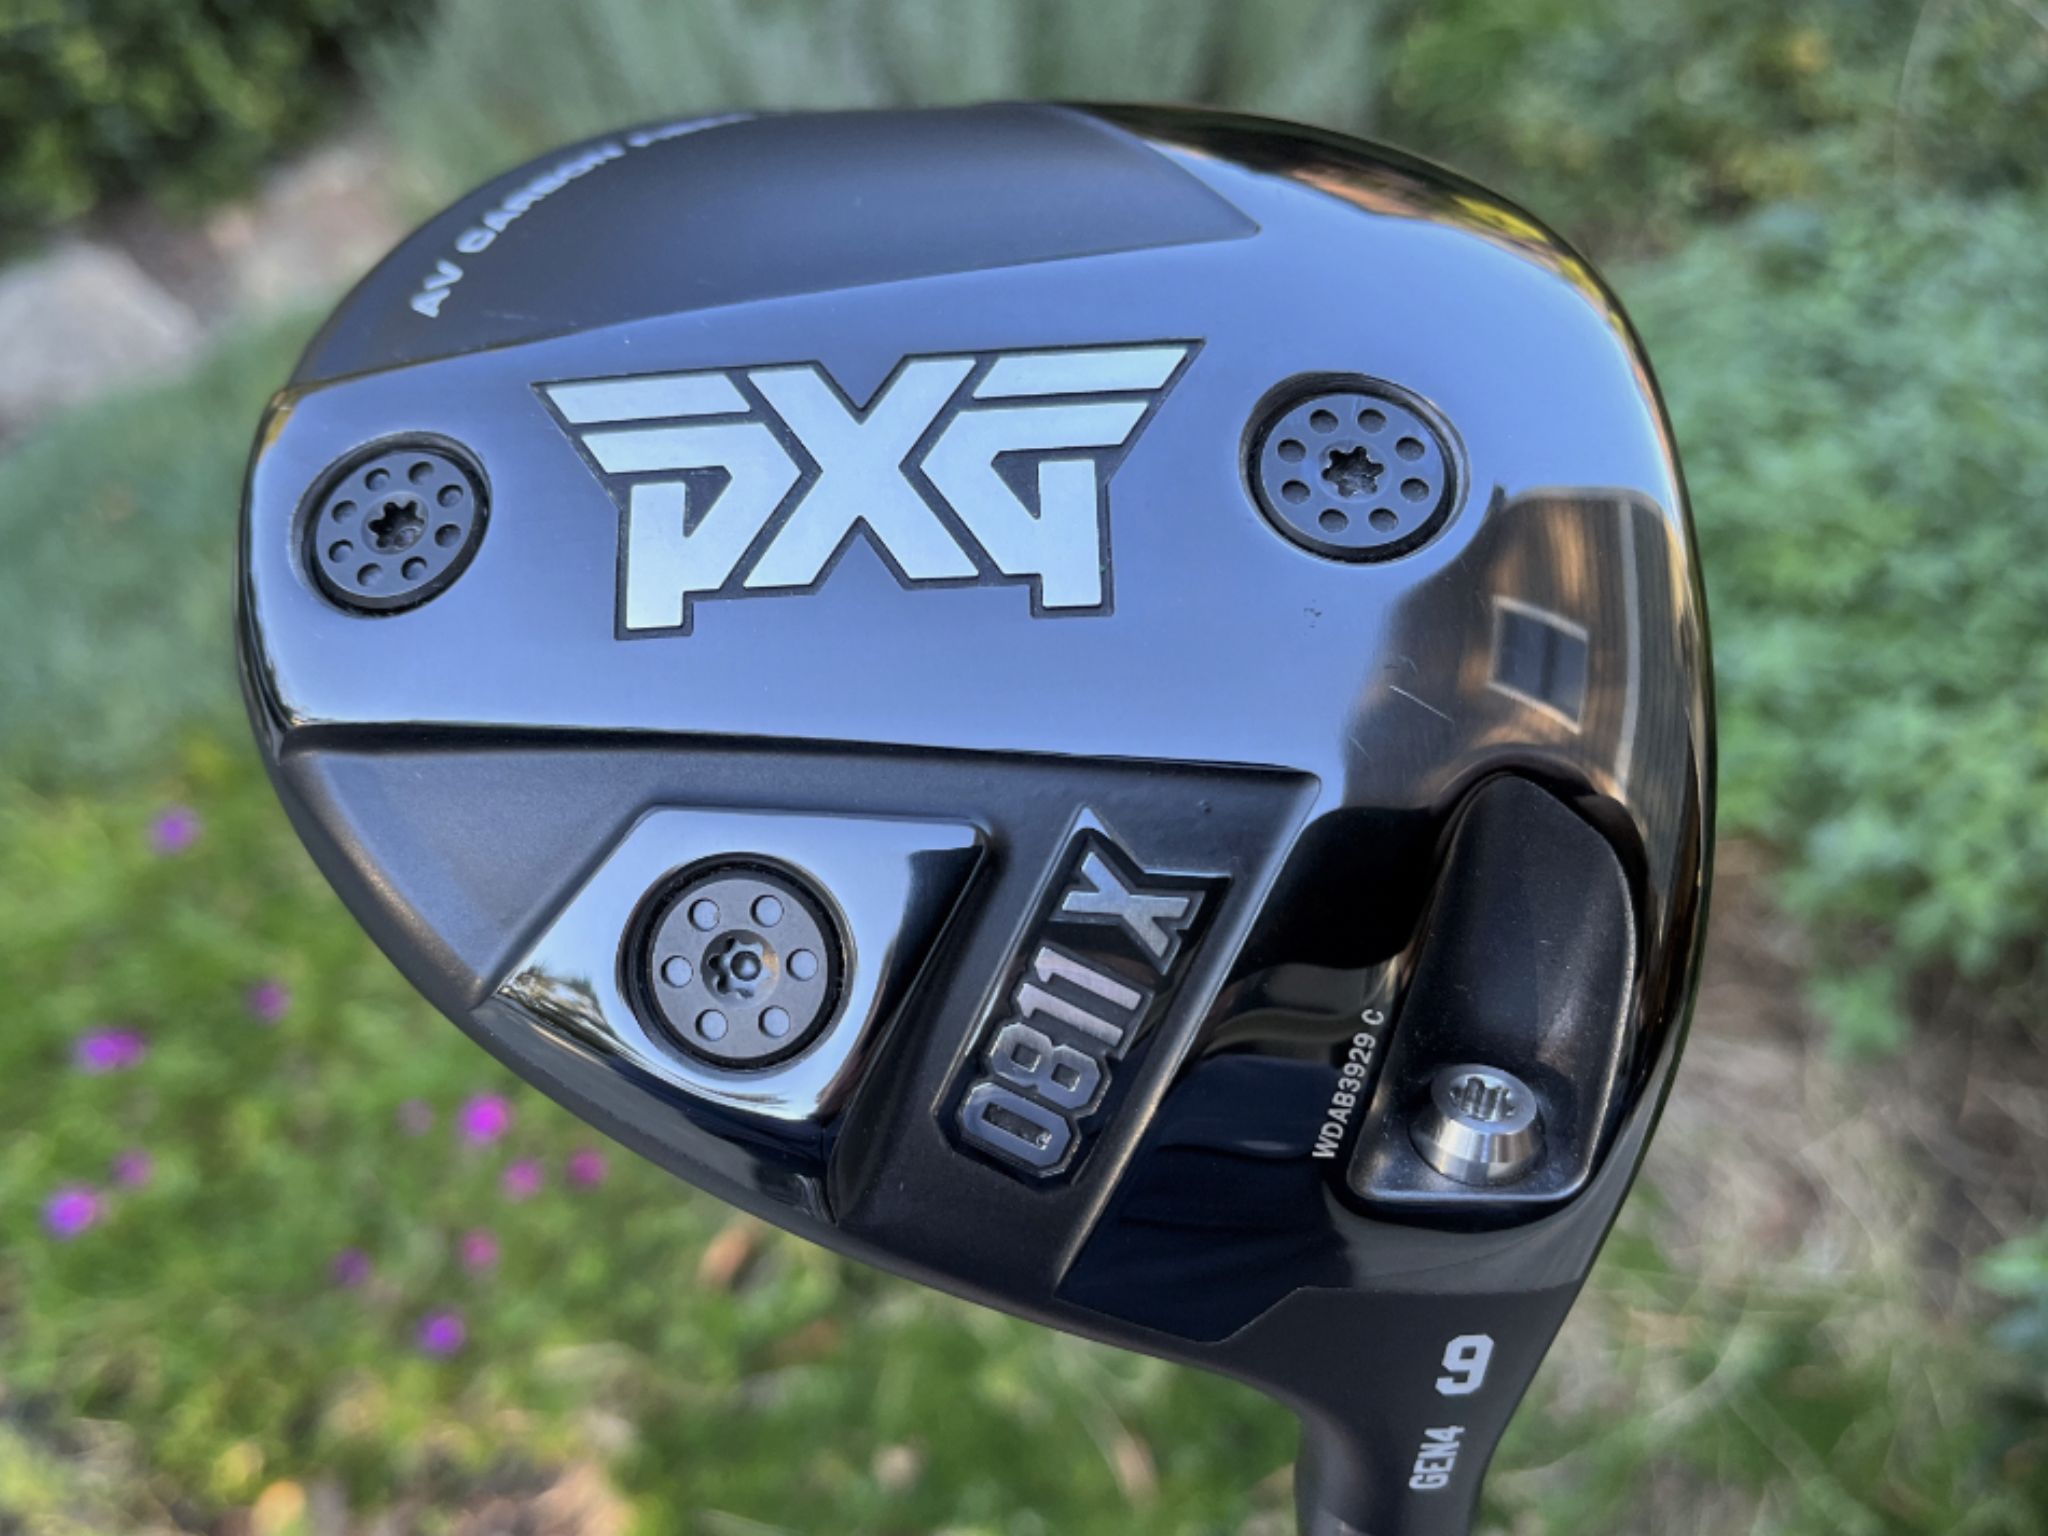 Coolest thing for sale in the GolfWRX Classifieds (11/30/21): PXG